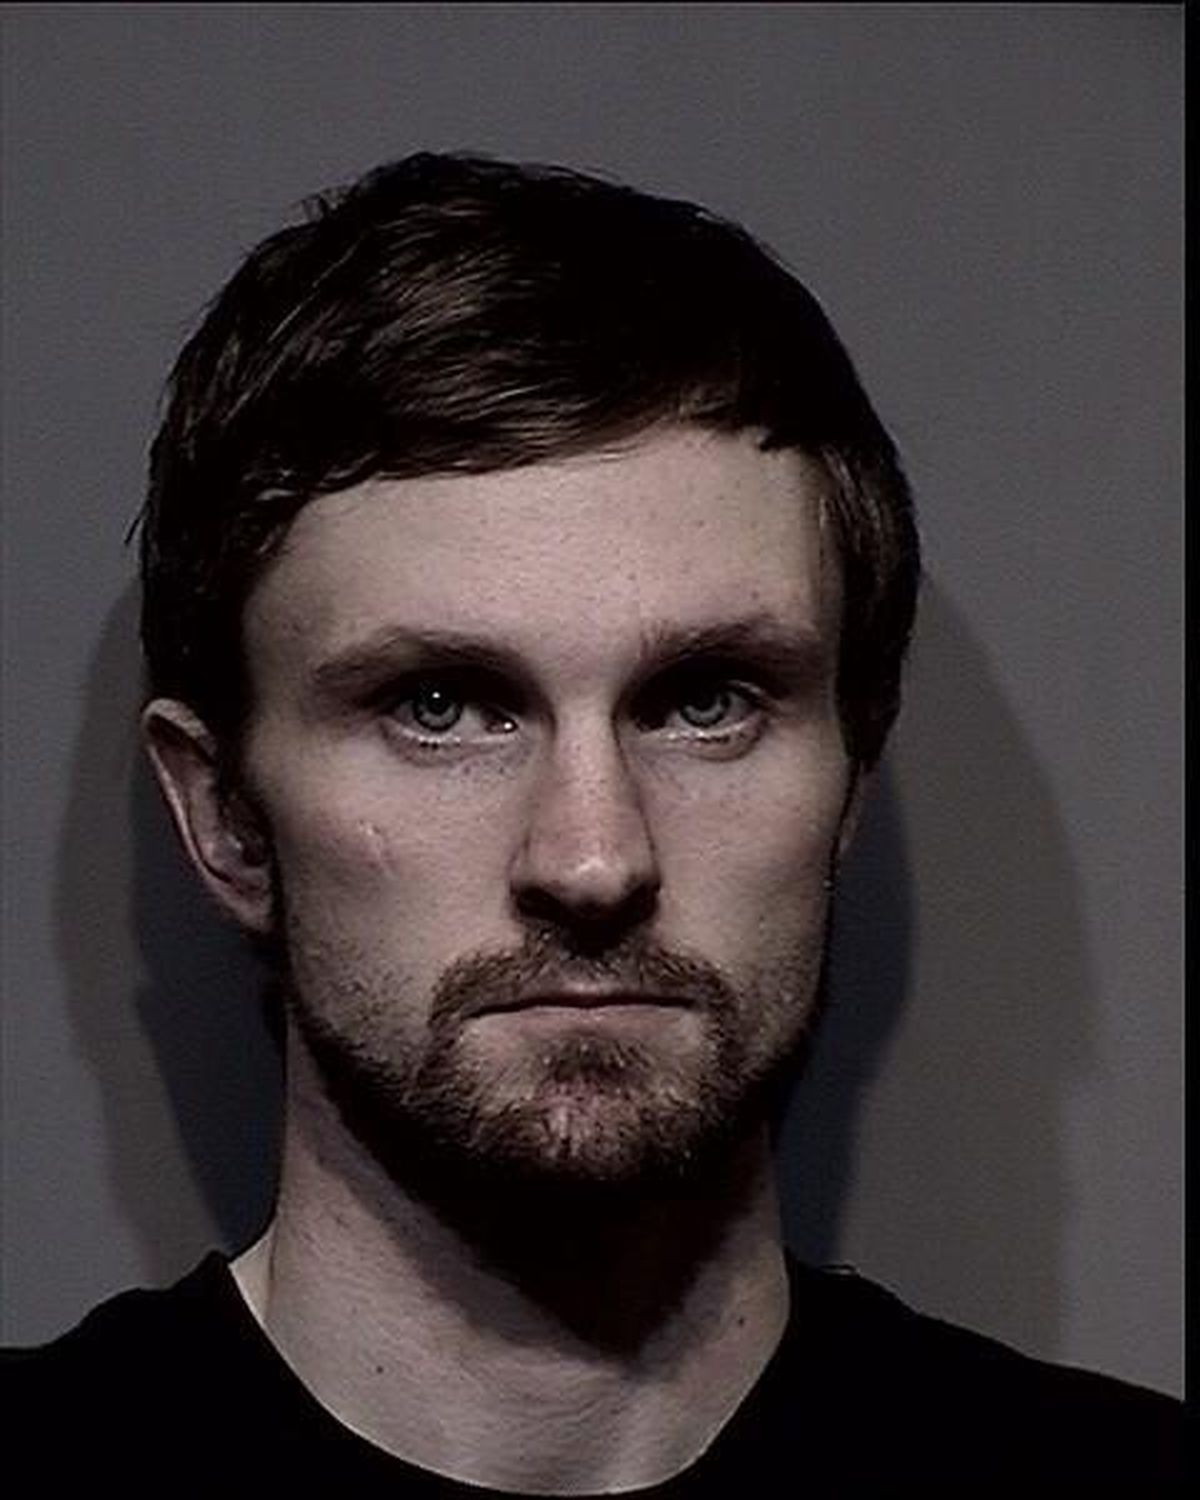 Tanner D. Flowerdew, 26, was arrested Saturday in connection with a car theft in Kootenai County. (Courtesy of Kootenai County Sheriff’s Office / SR)